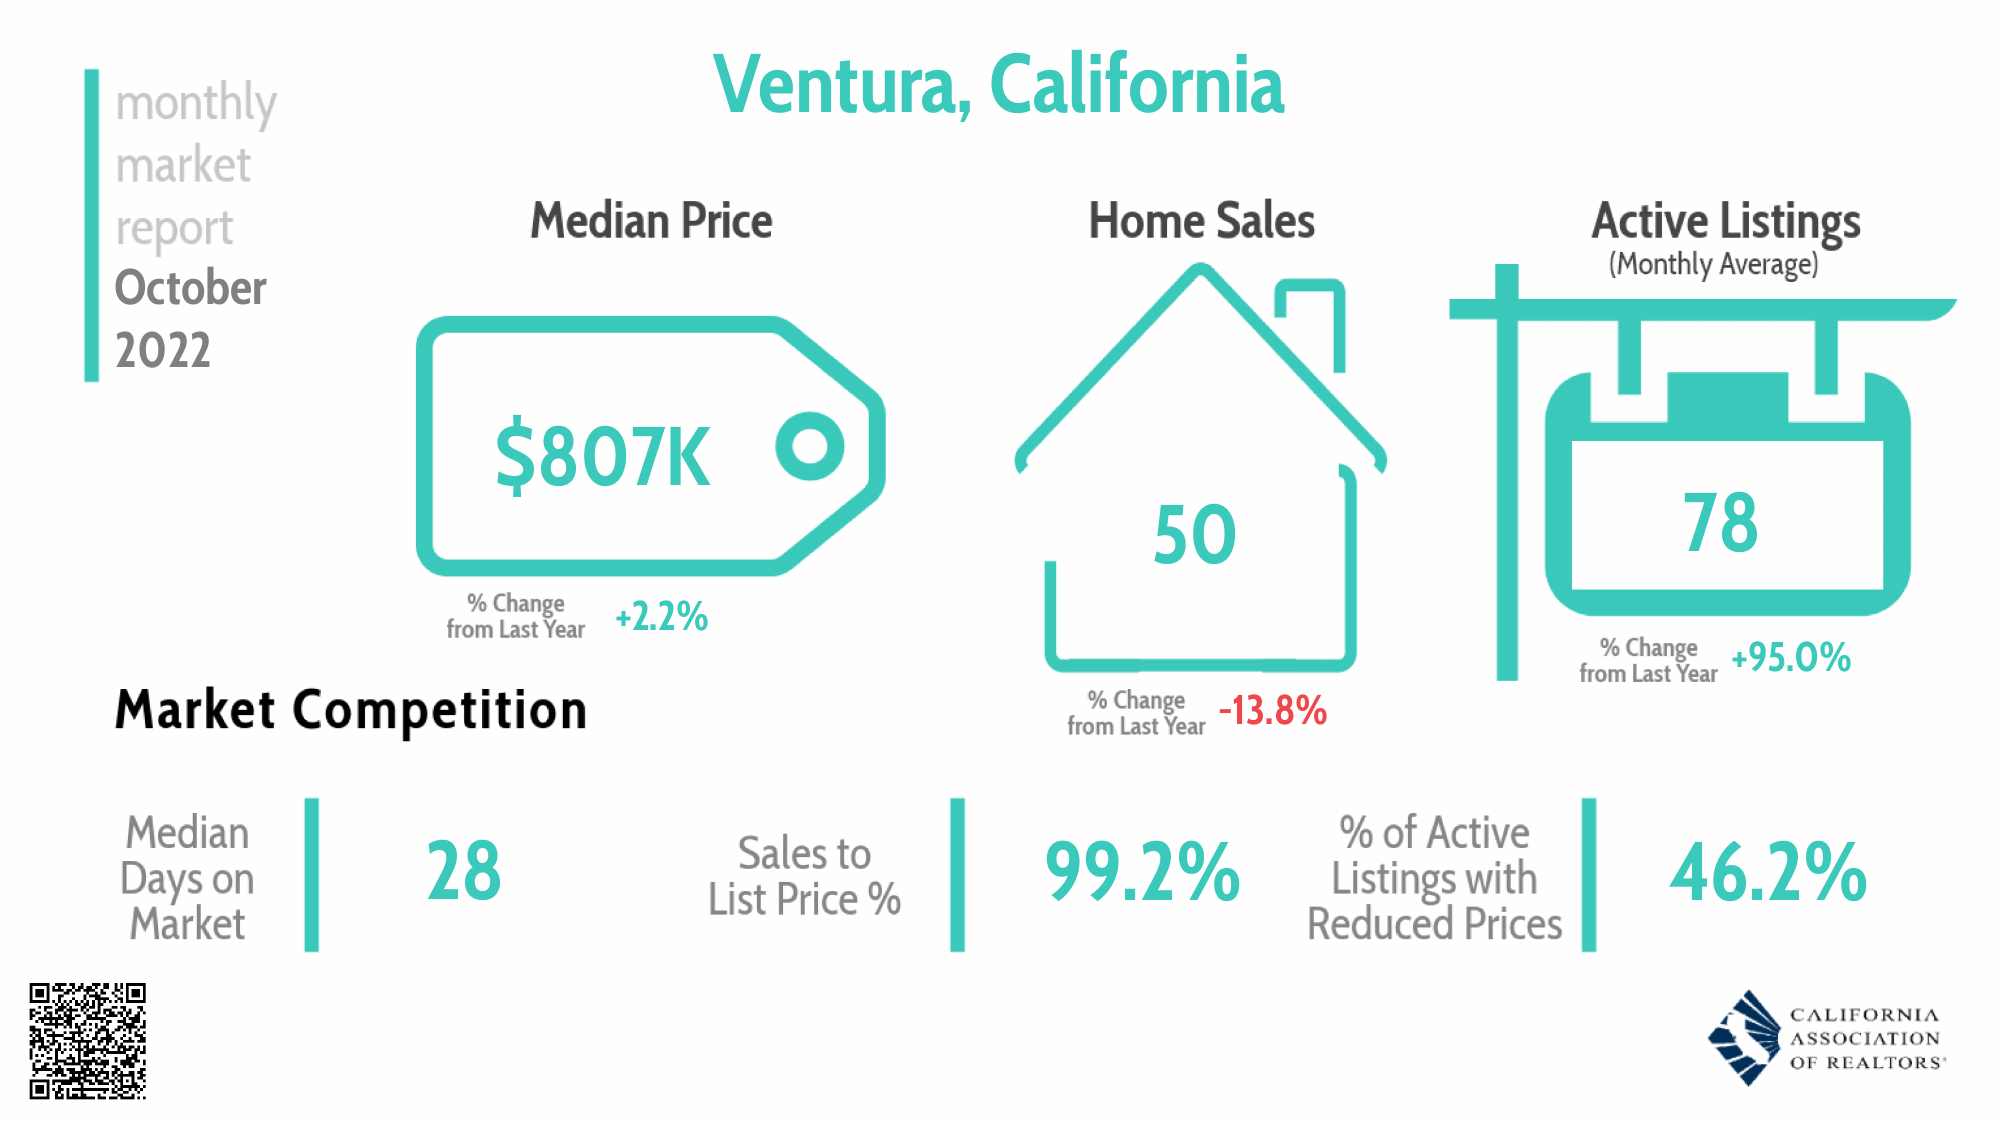 City of Ventura Monthly Real Estate Market Report